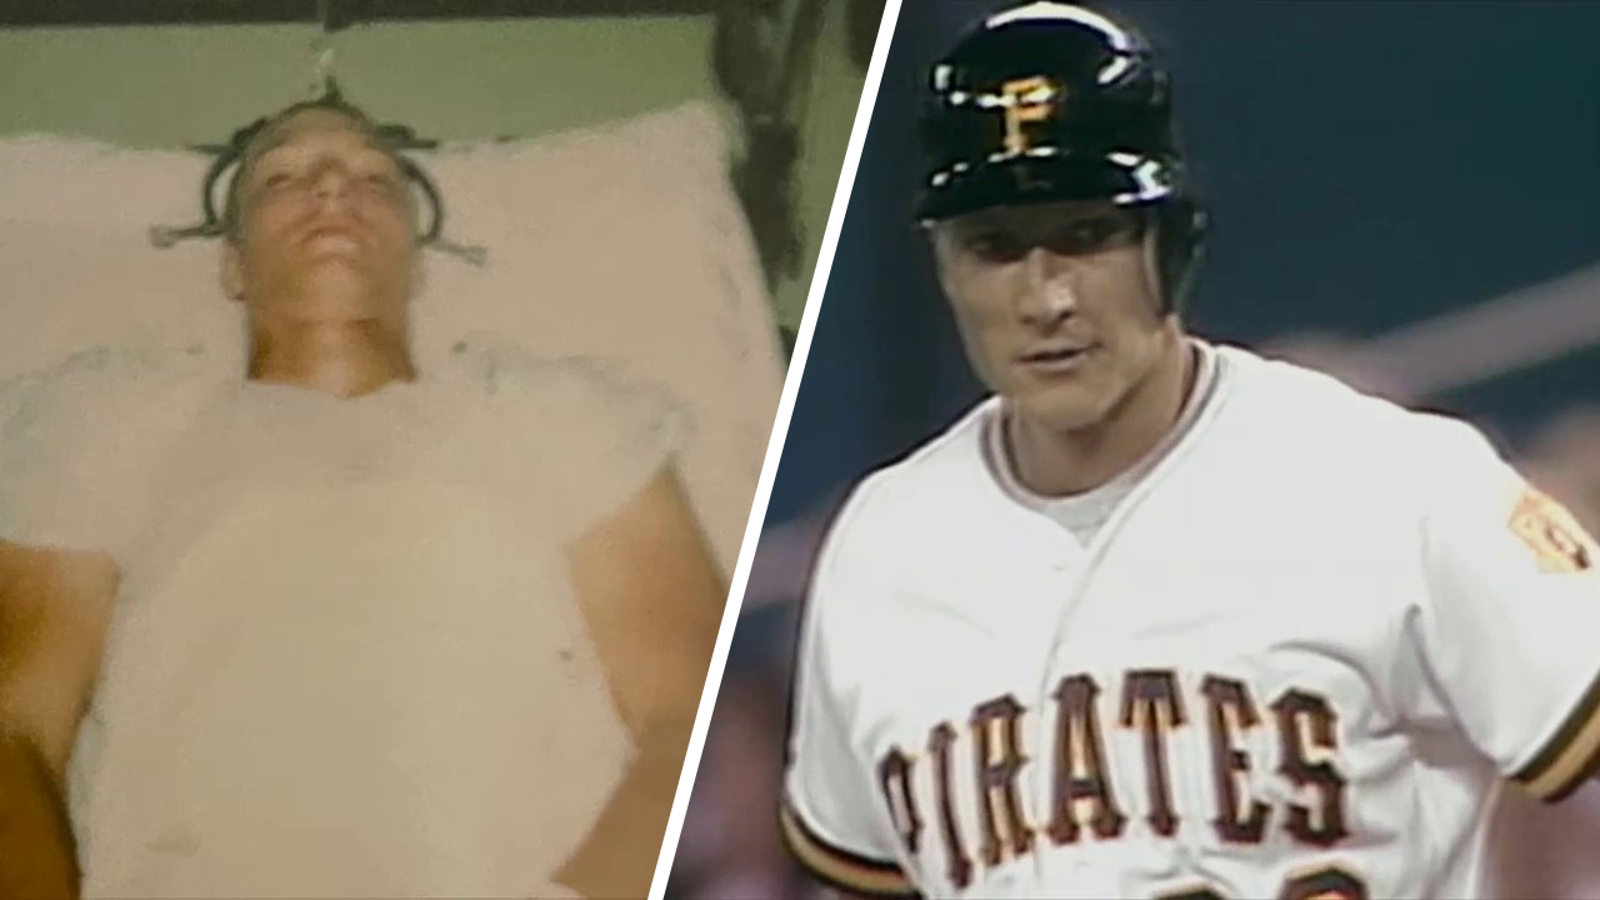 Tom Rinaldi shares Jeff Banister's incredible story of heartbreak and perseverance